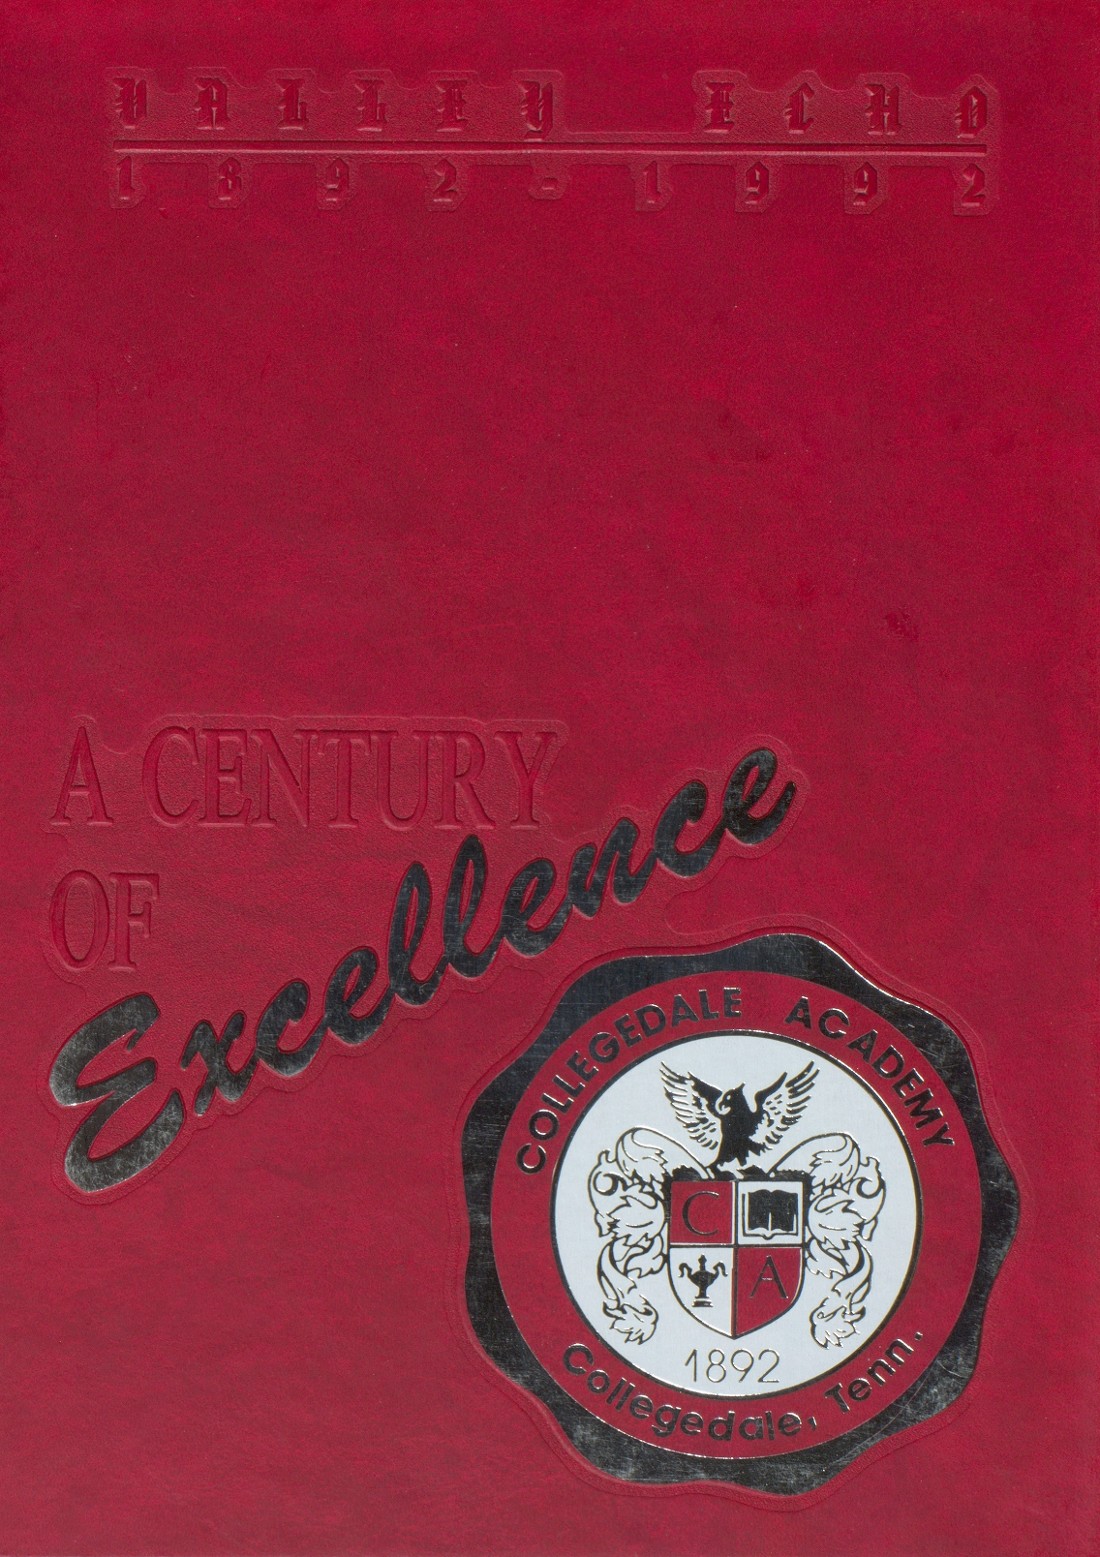 Electronic book - Collegedale Academy